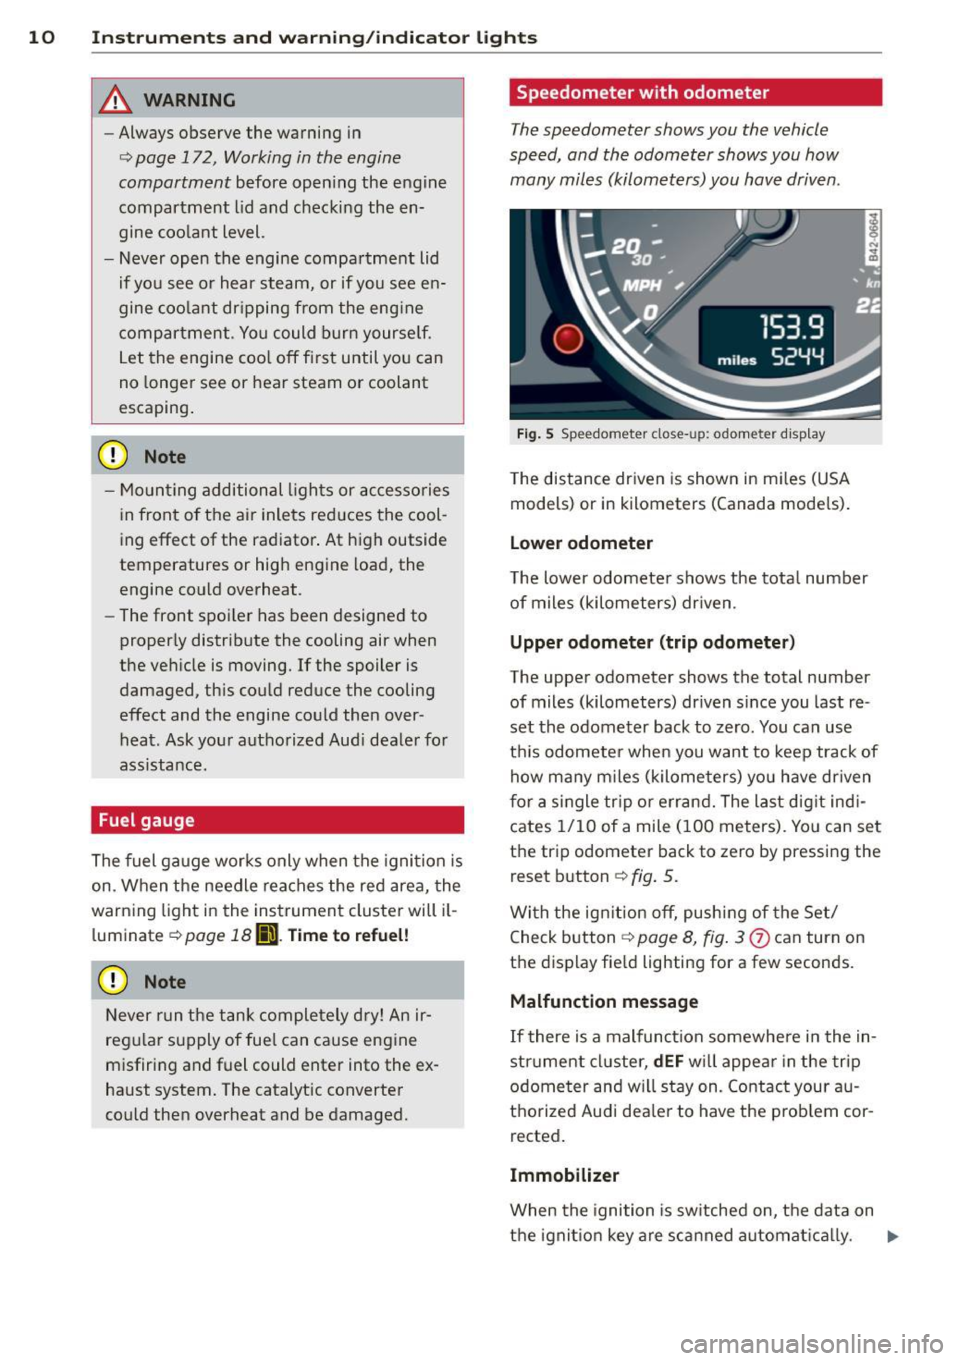 AUDI R8 SPYDER 2014  Owners Manual 10  Instrum ents  a nd warning /indic ato r  li ghts 
& WARNING 
-Always  observe  the  warning  in 
¢ page  172,  Working  in  the  engine 
compartment 
before  open ing  the  engine 
compartment  l